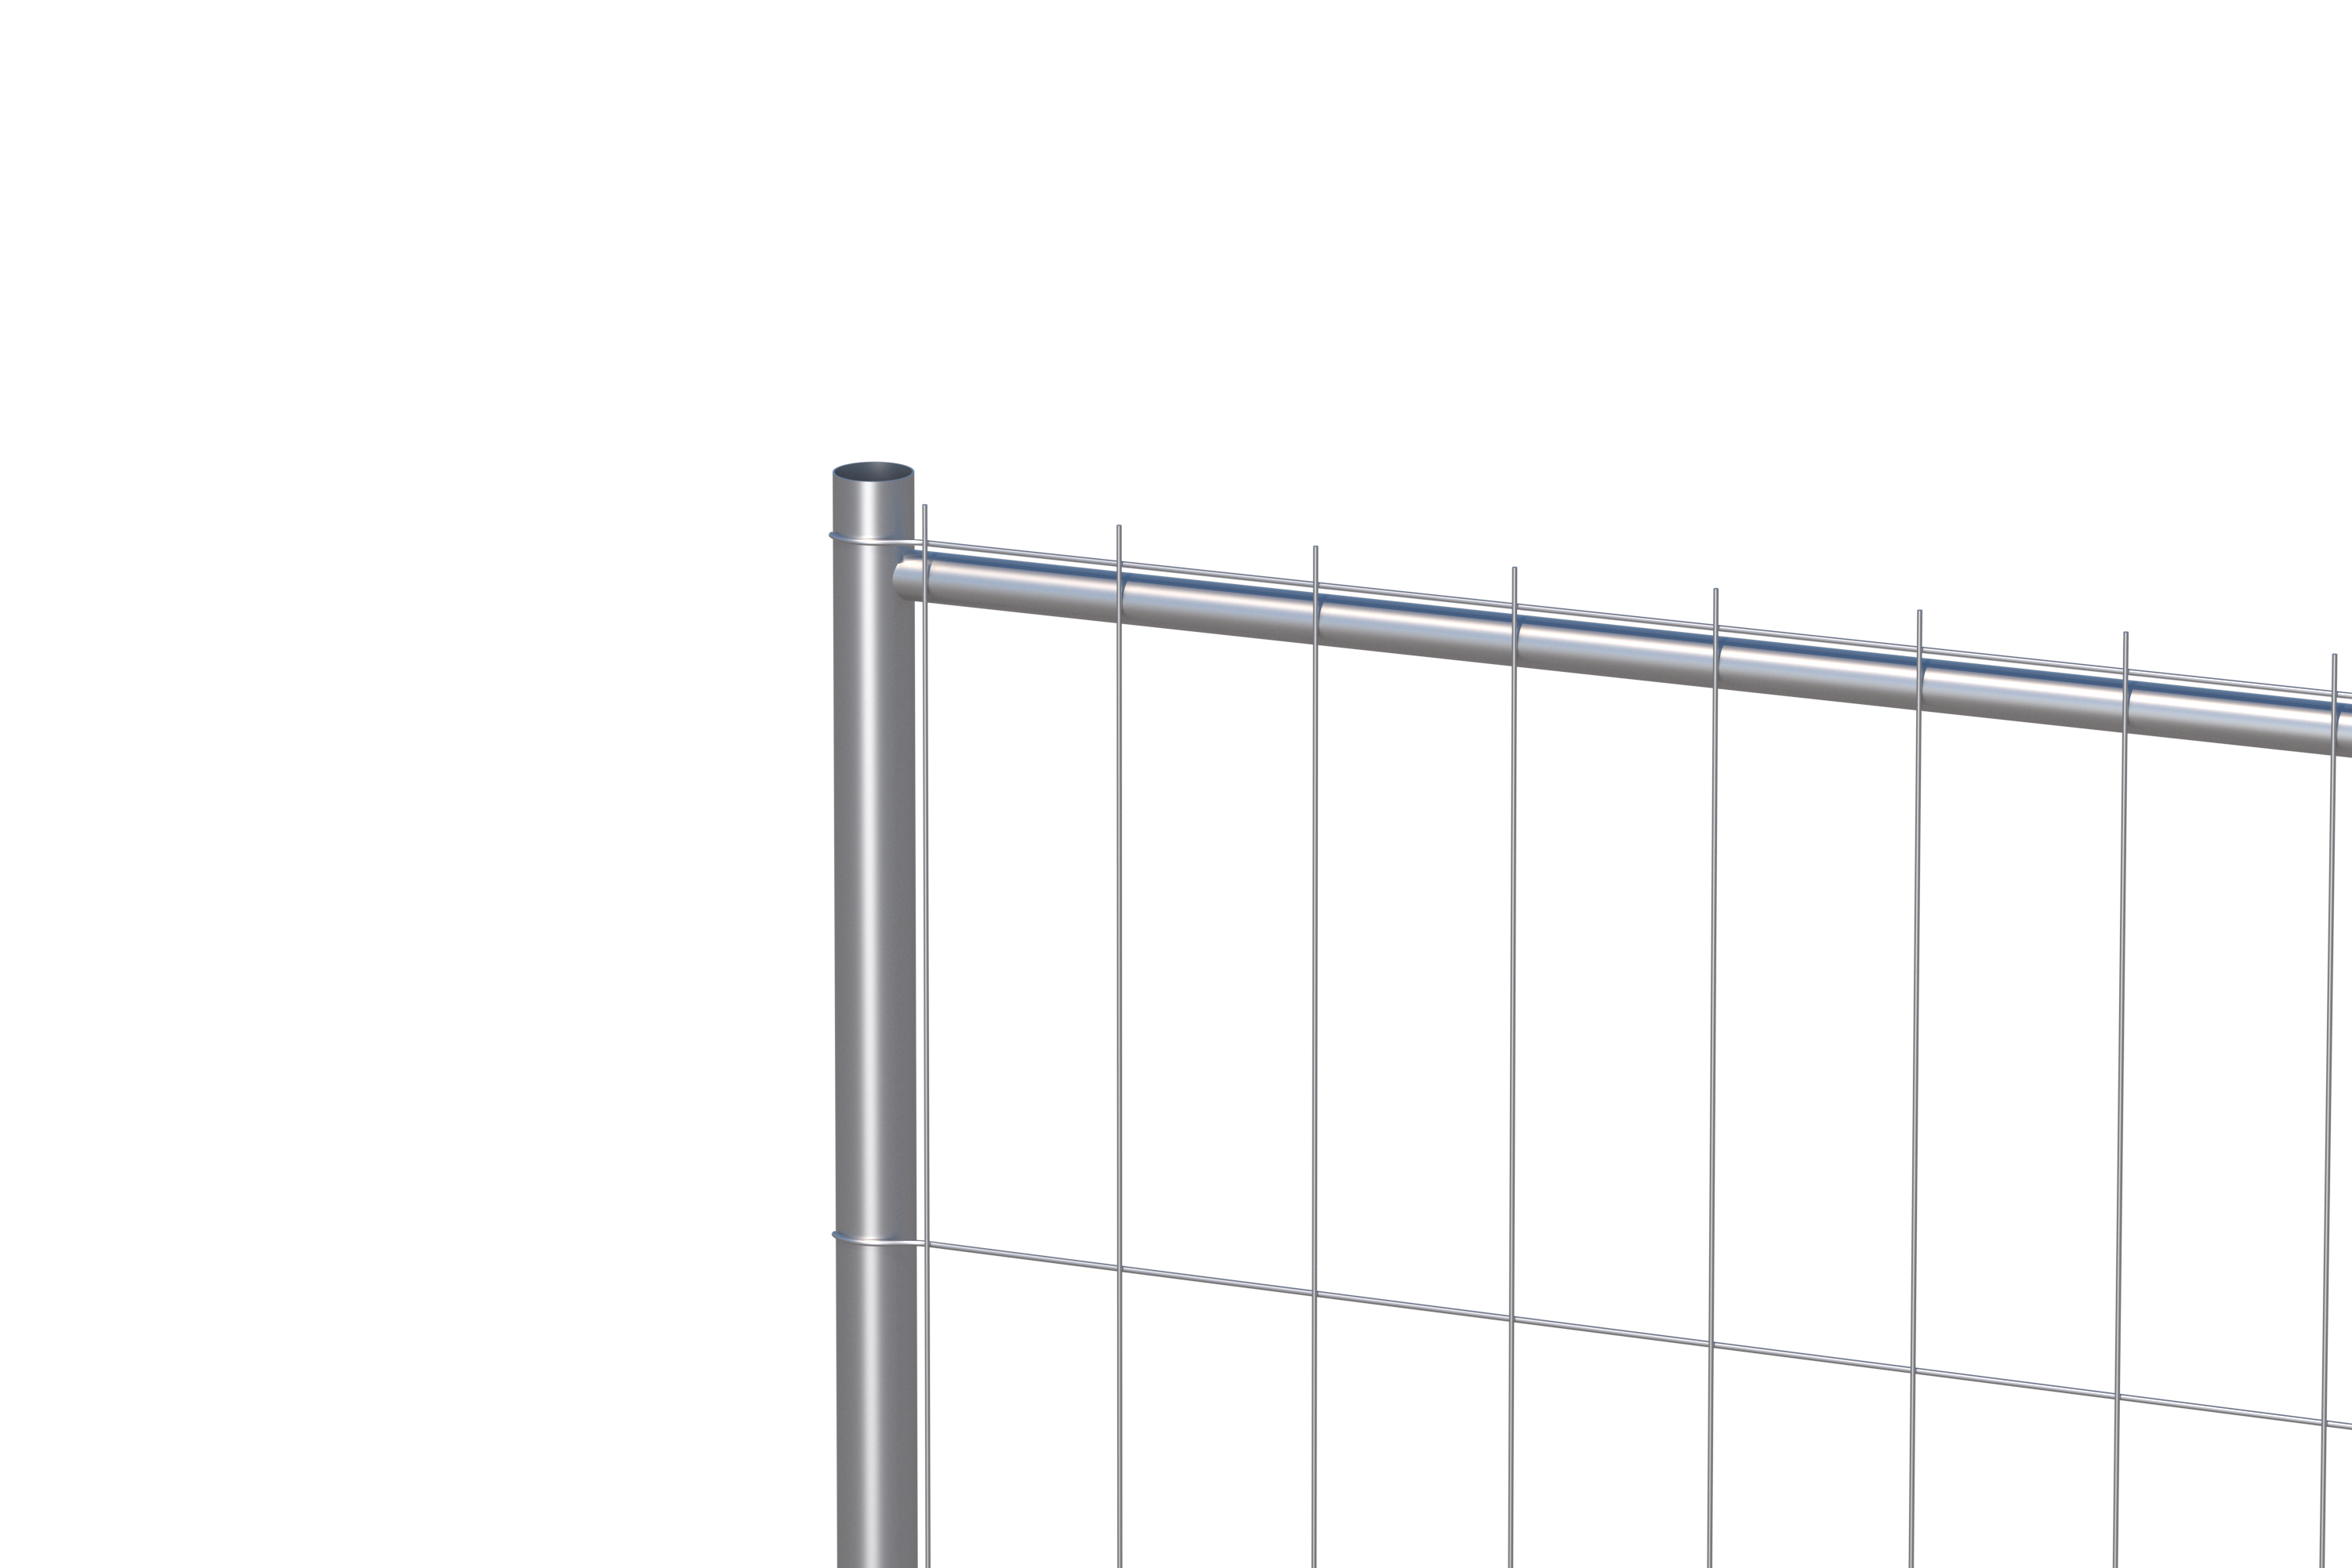 Mobile Fence M350-3